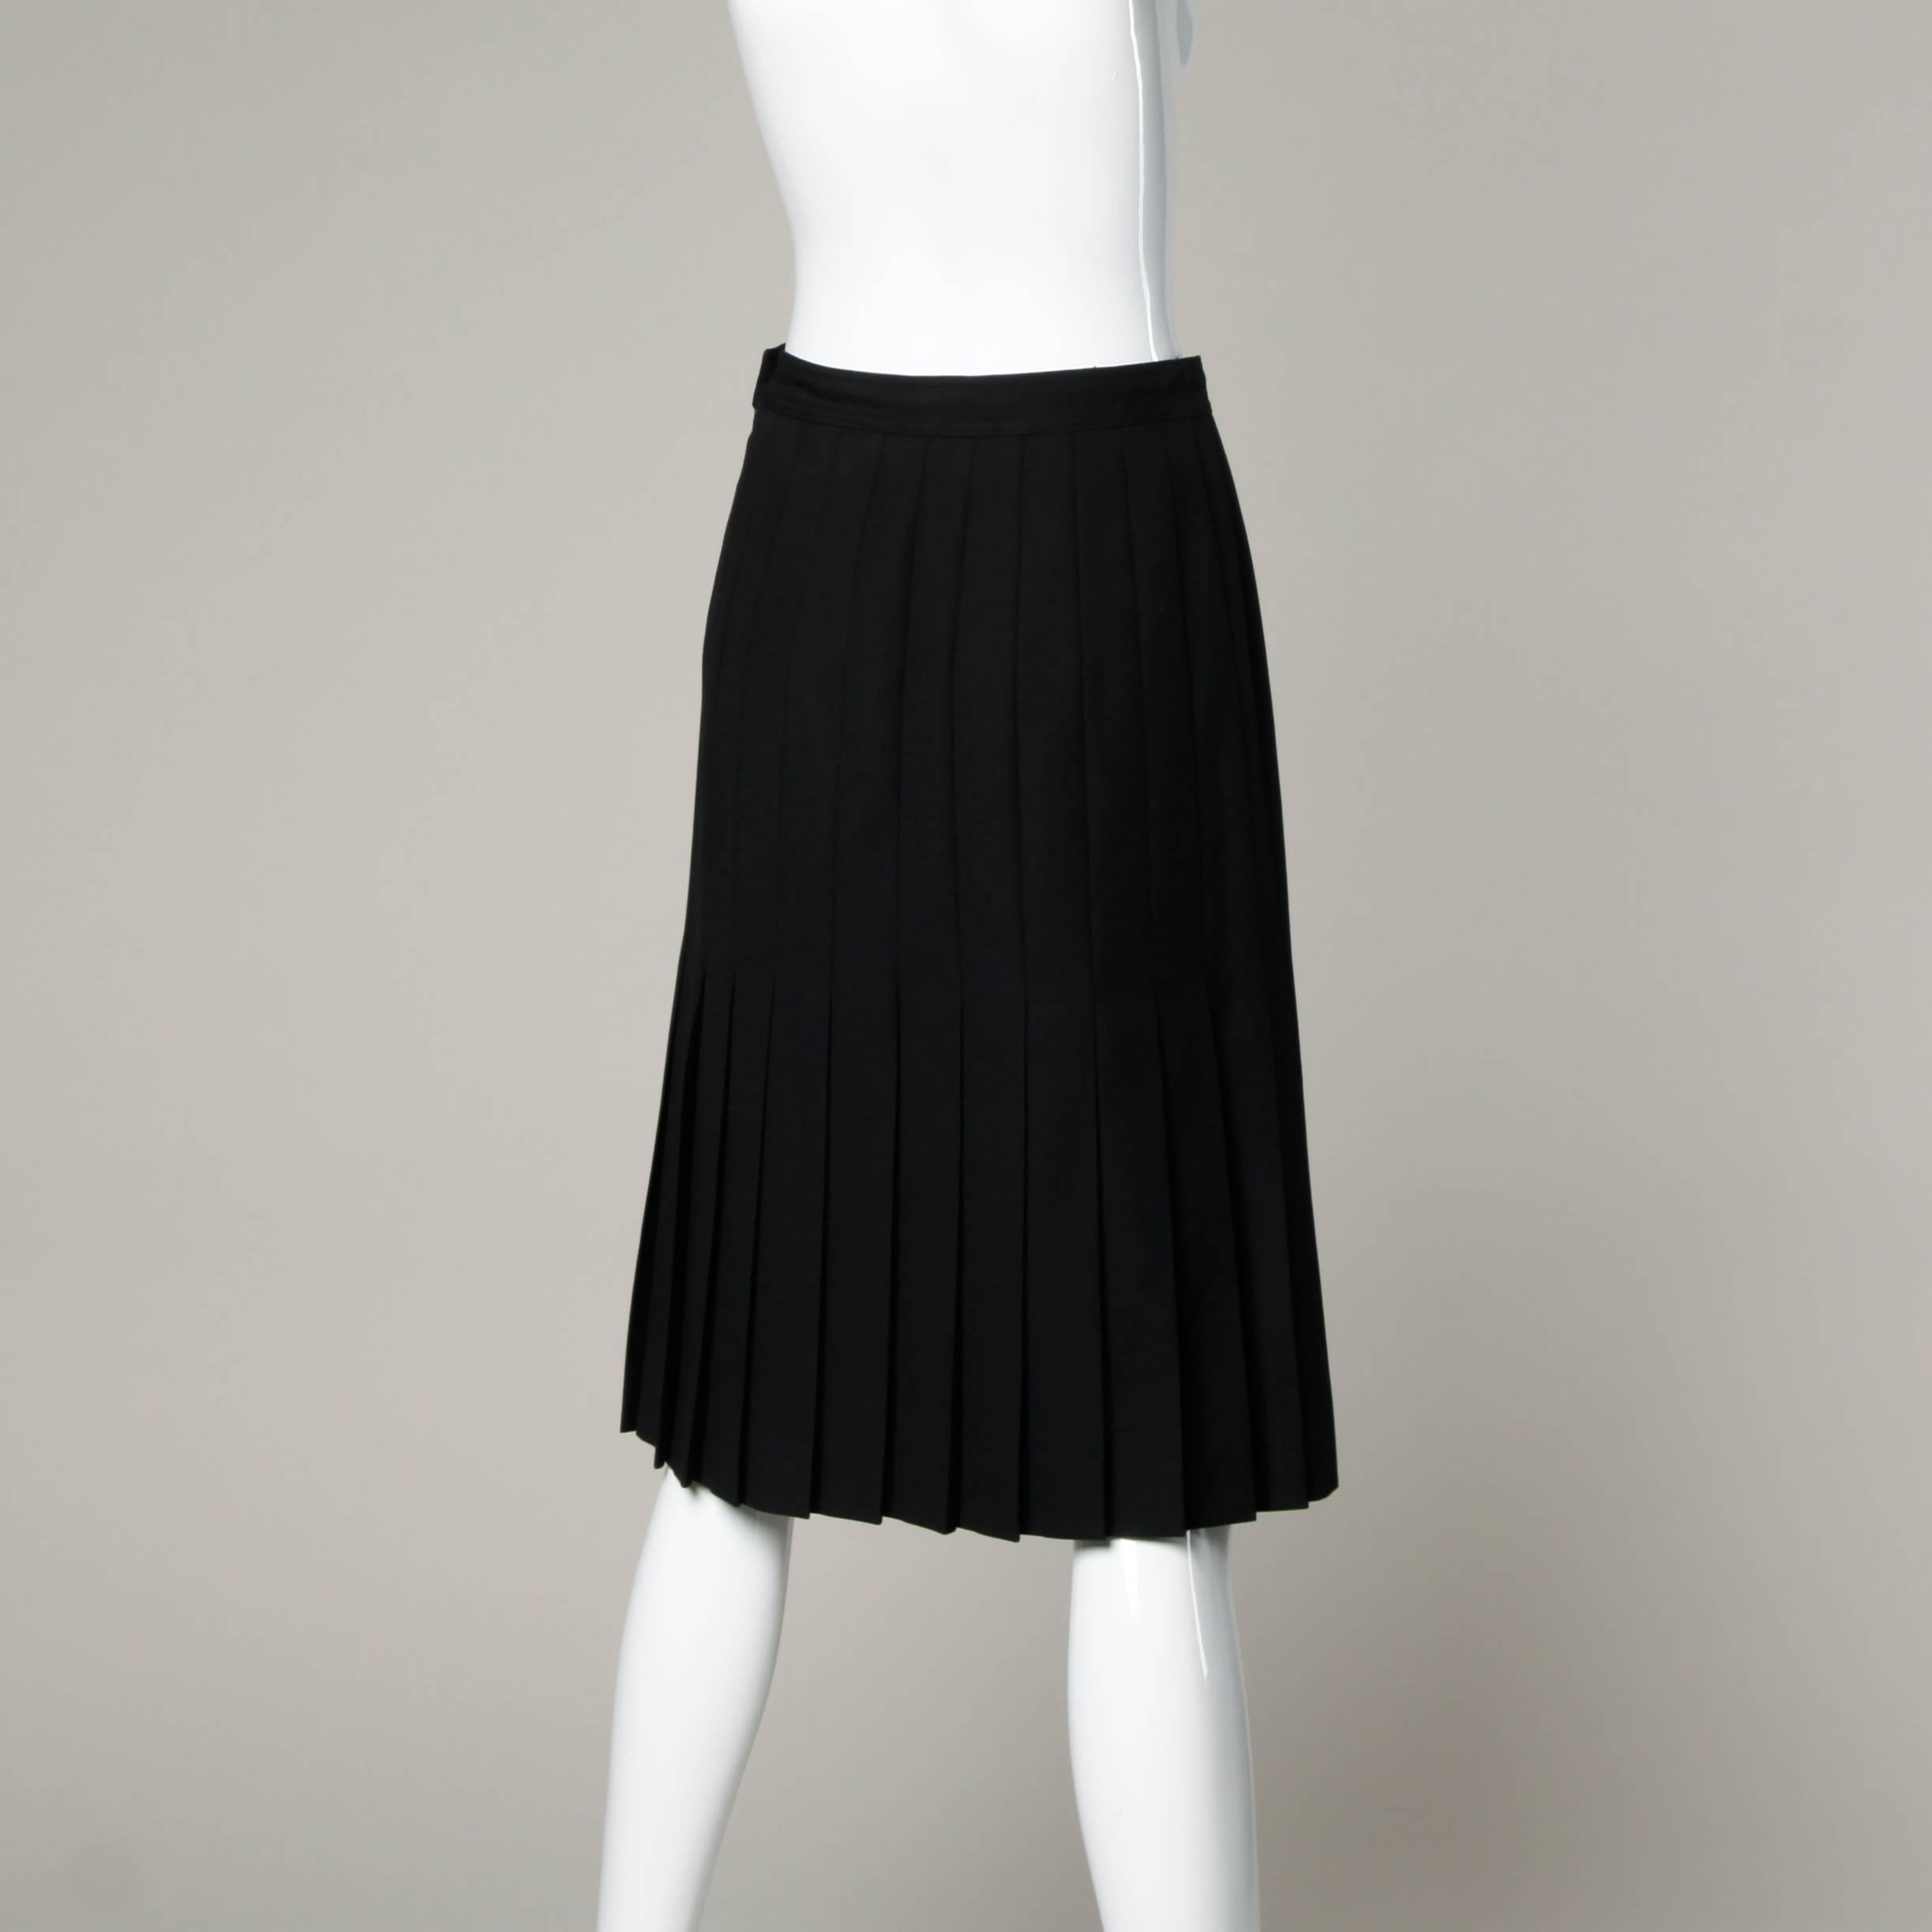 Gorgeous Valentino for Neiman Marcus black wool pleated skirt. Beautiful quality and construction!
Details:
Unlined
Side Zip and Button Closure 
Marked Size: IT 44/ US 10
Estimated Size: Medium
Color: Black 
Fabric: 100% Wool 
Label: Valentino